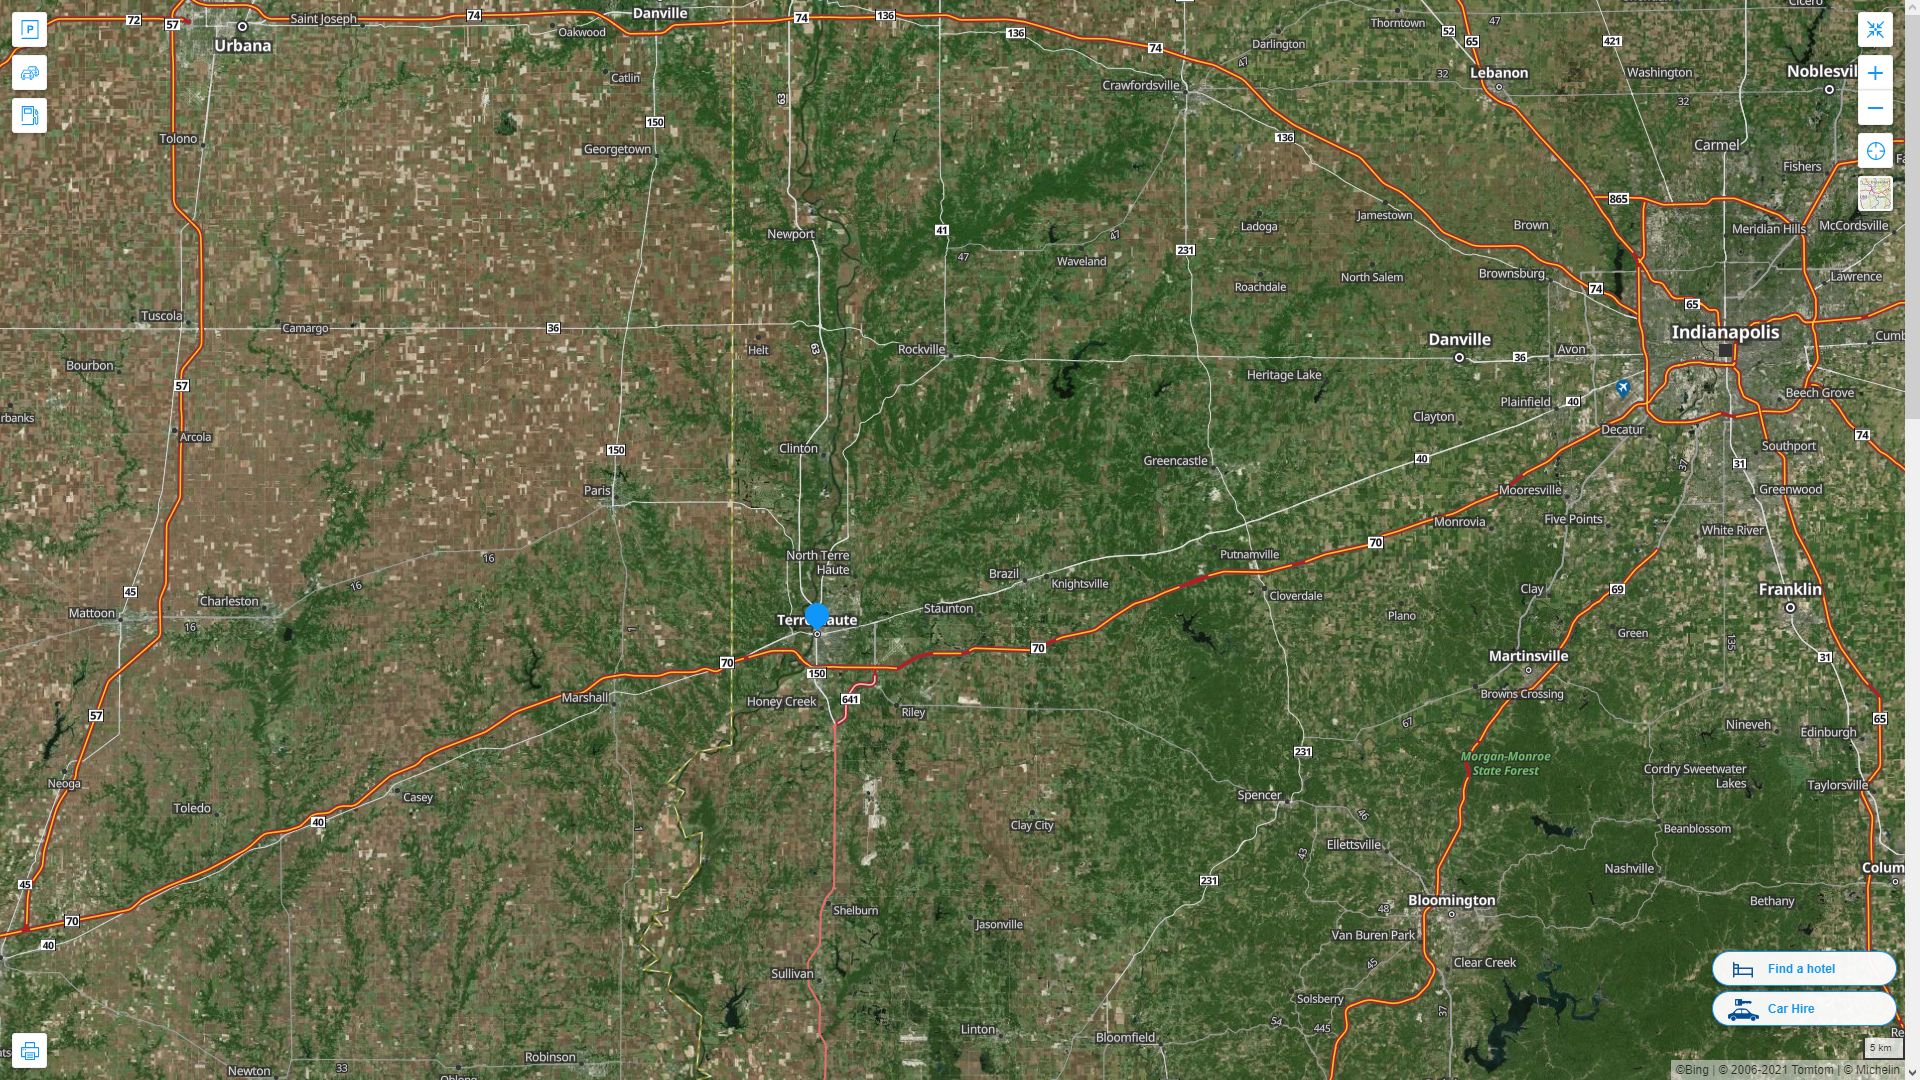 Terre Haute Indiana Highway and Road Map with Satellite View